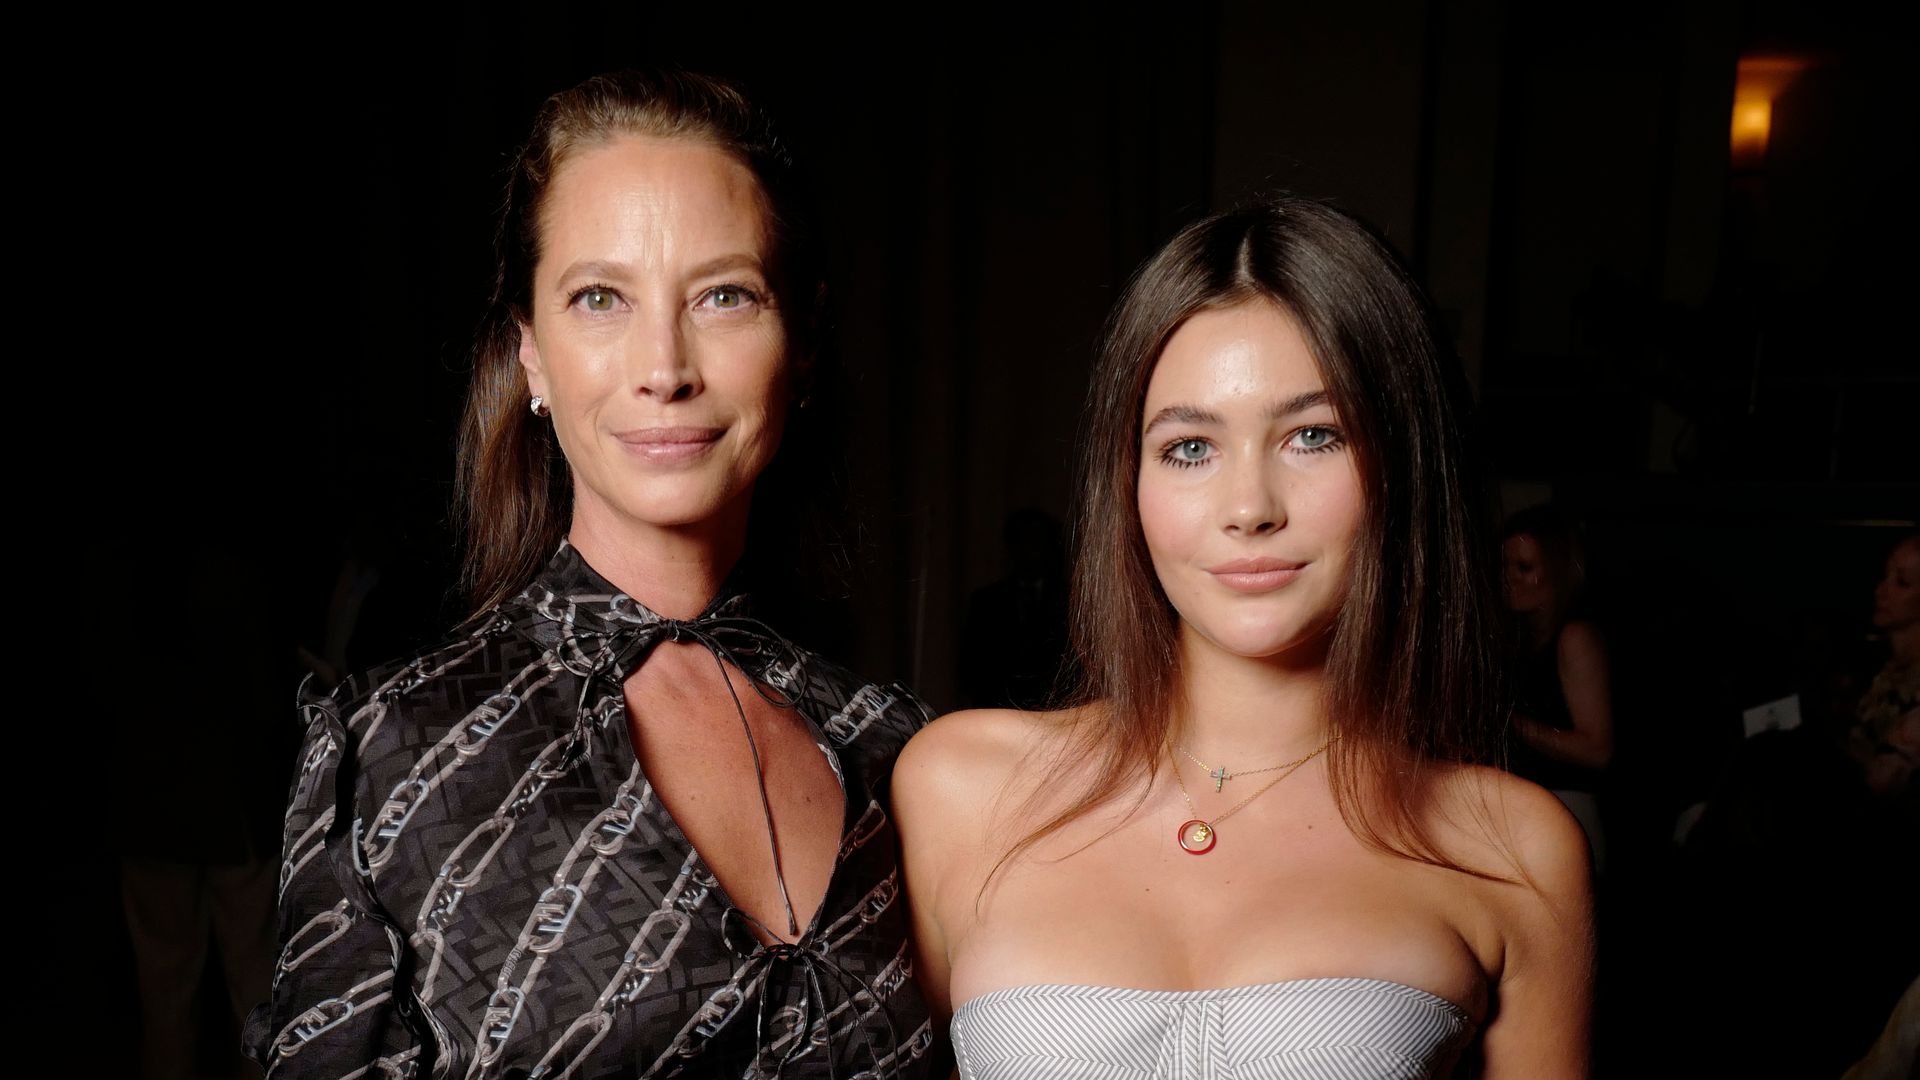 Christy Turlington's 19-year-old daughter makes runway debut - and is spitting image of supermodel mom